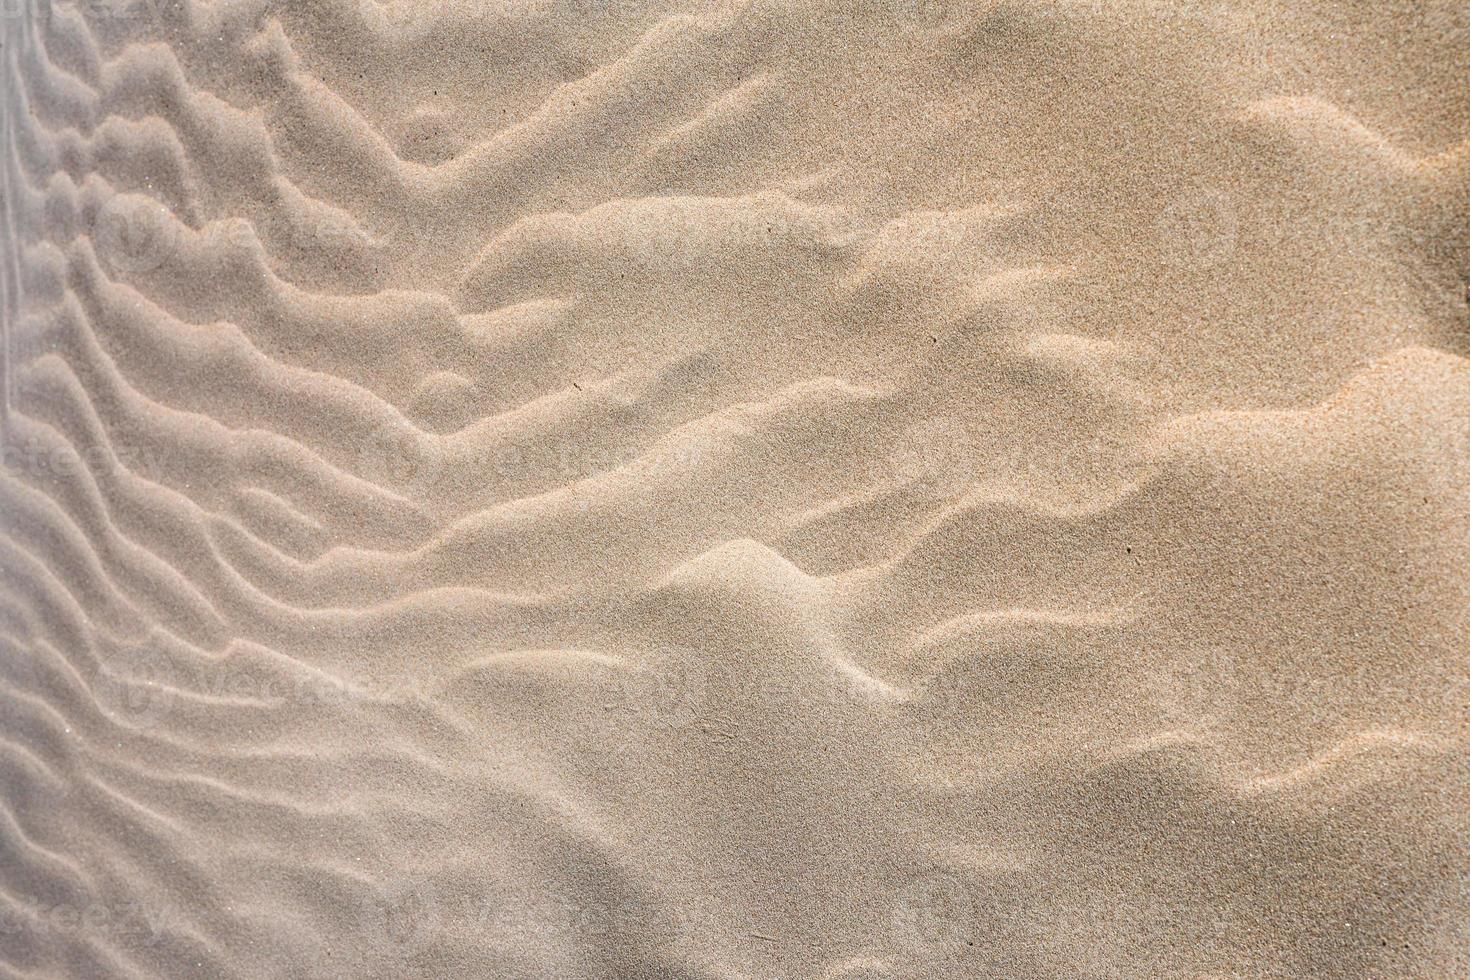 Patterns in The Beach Sand photo